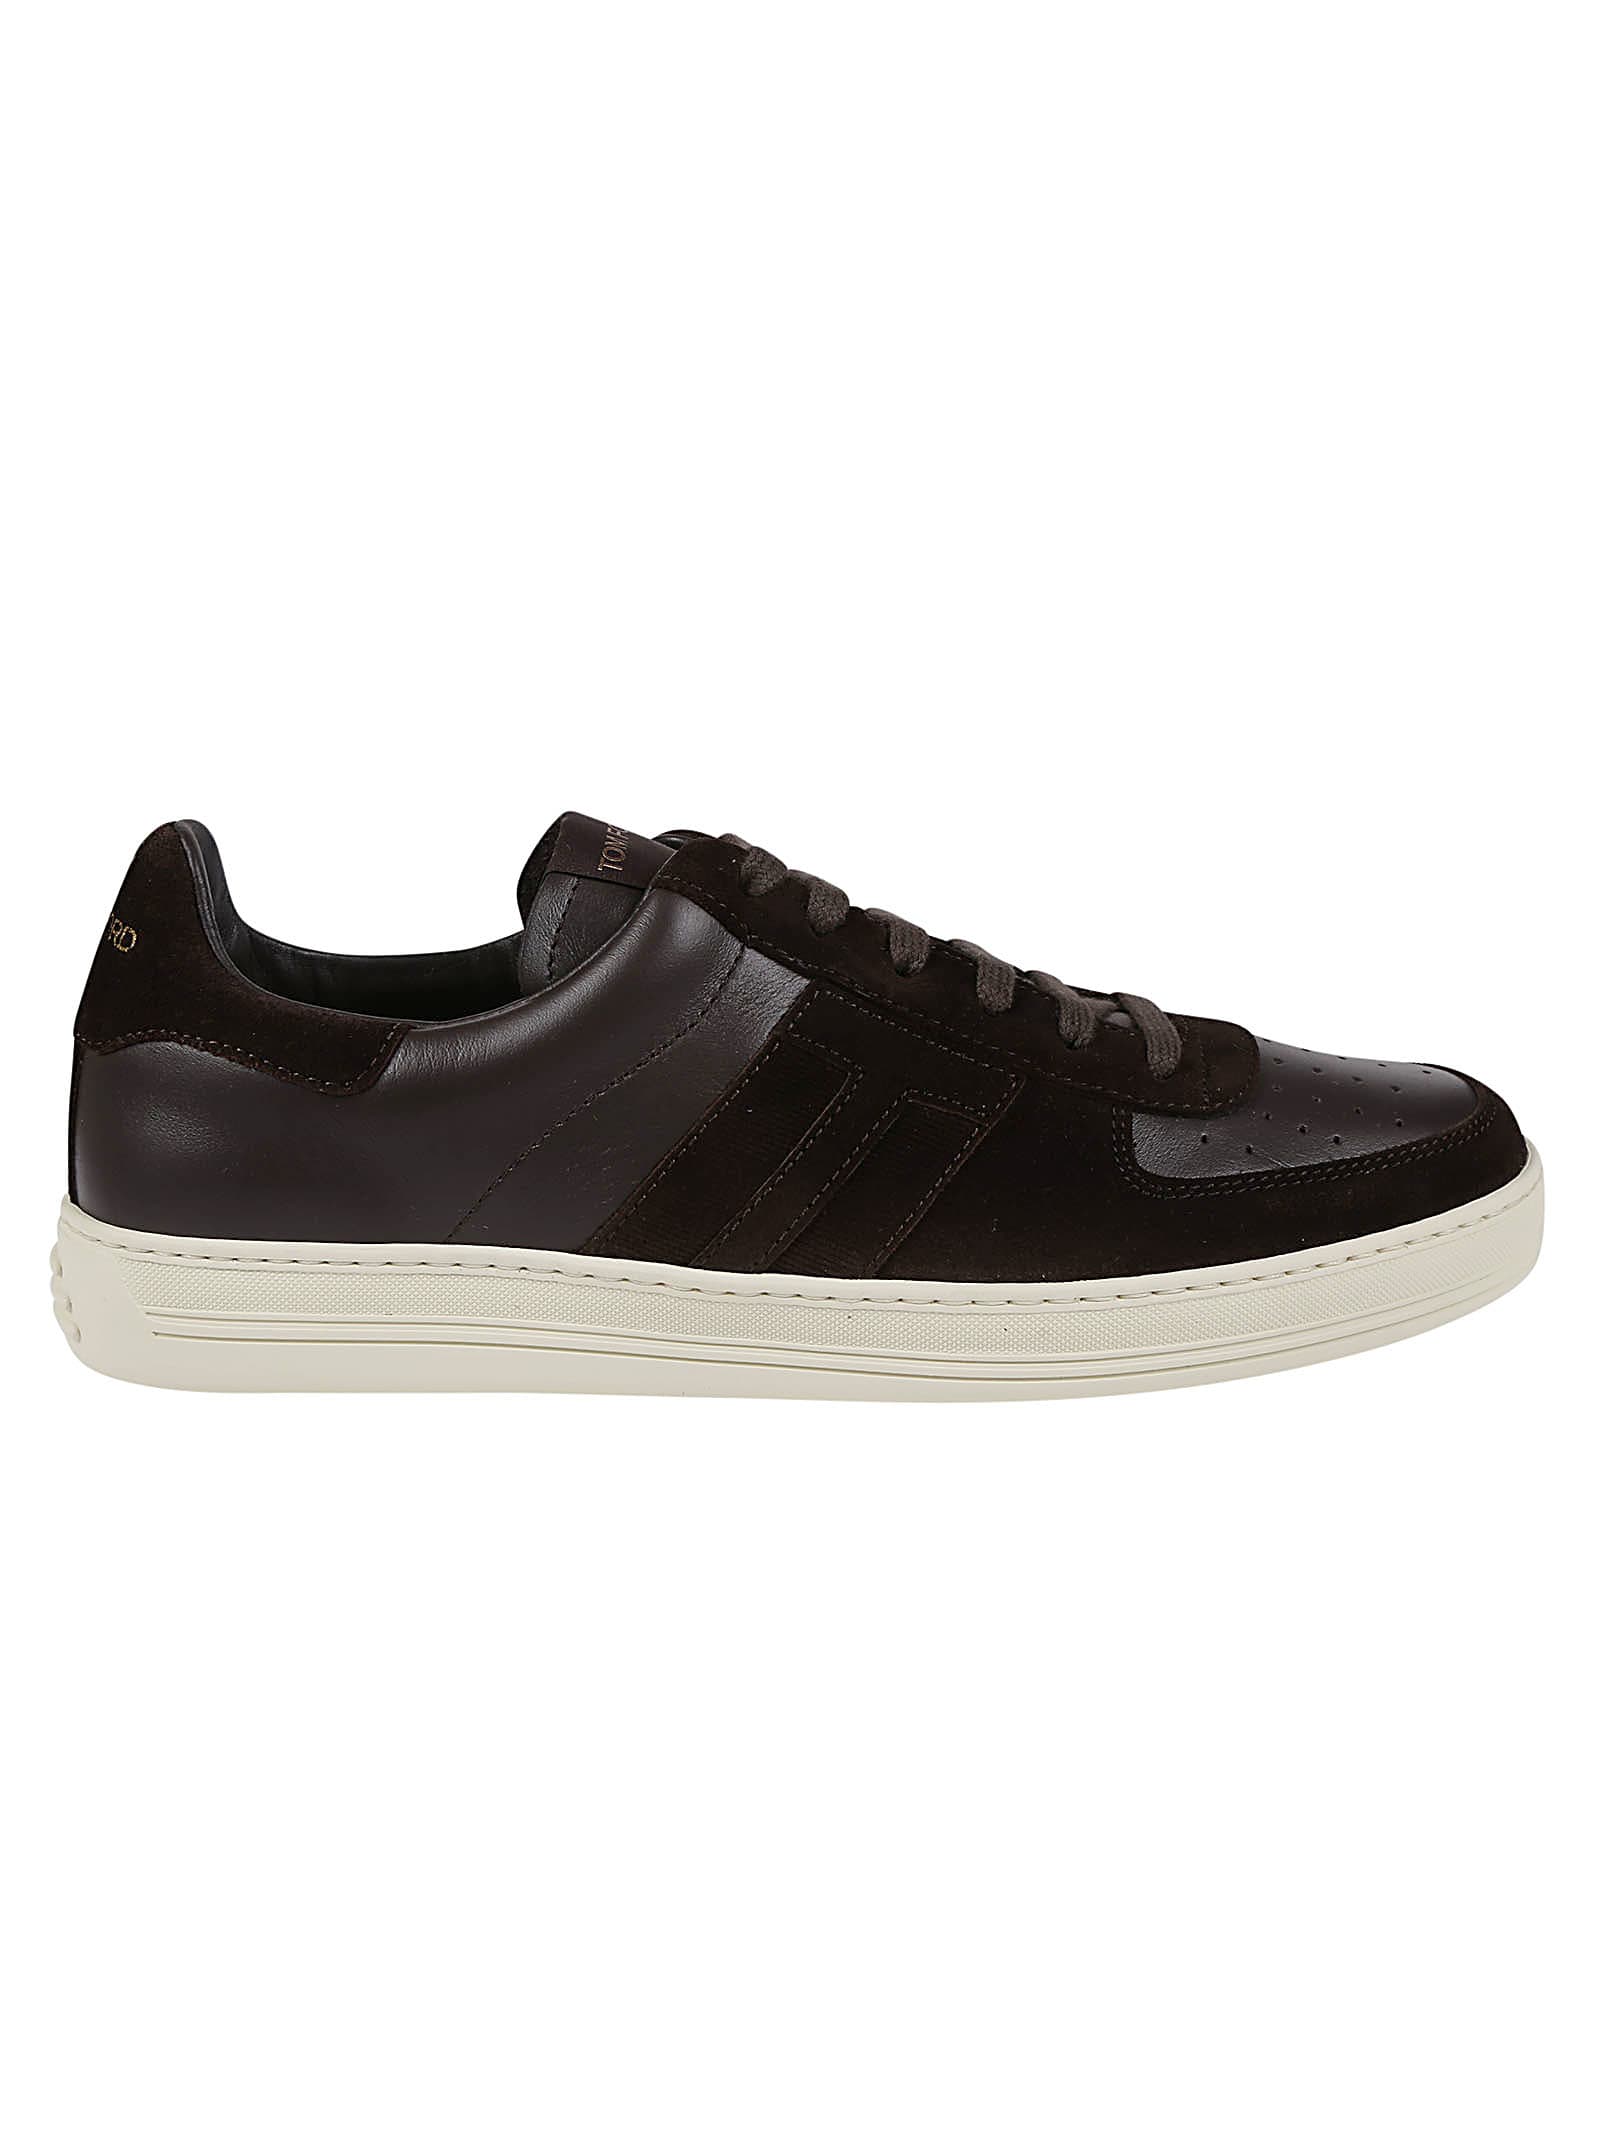 TOM FORD RADCLIFFE LOW TOP SNEAKERS